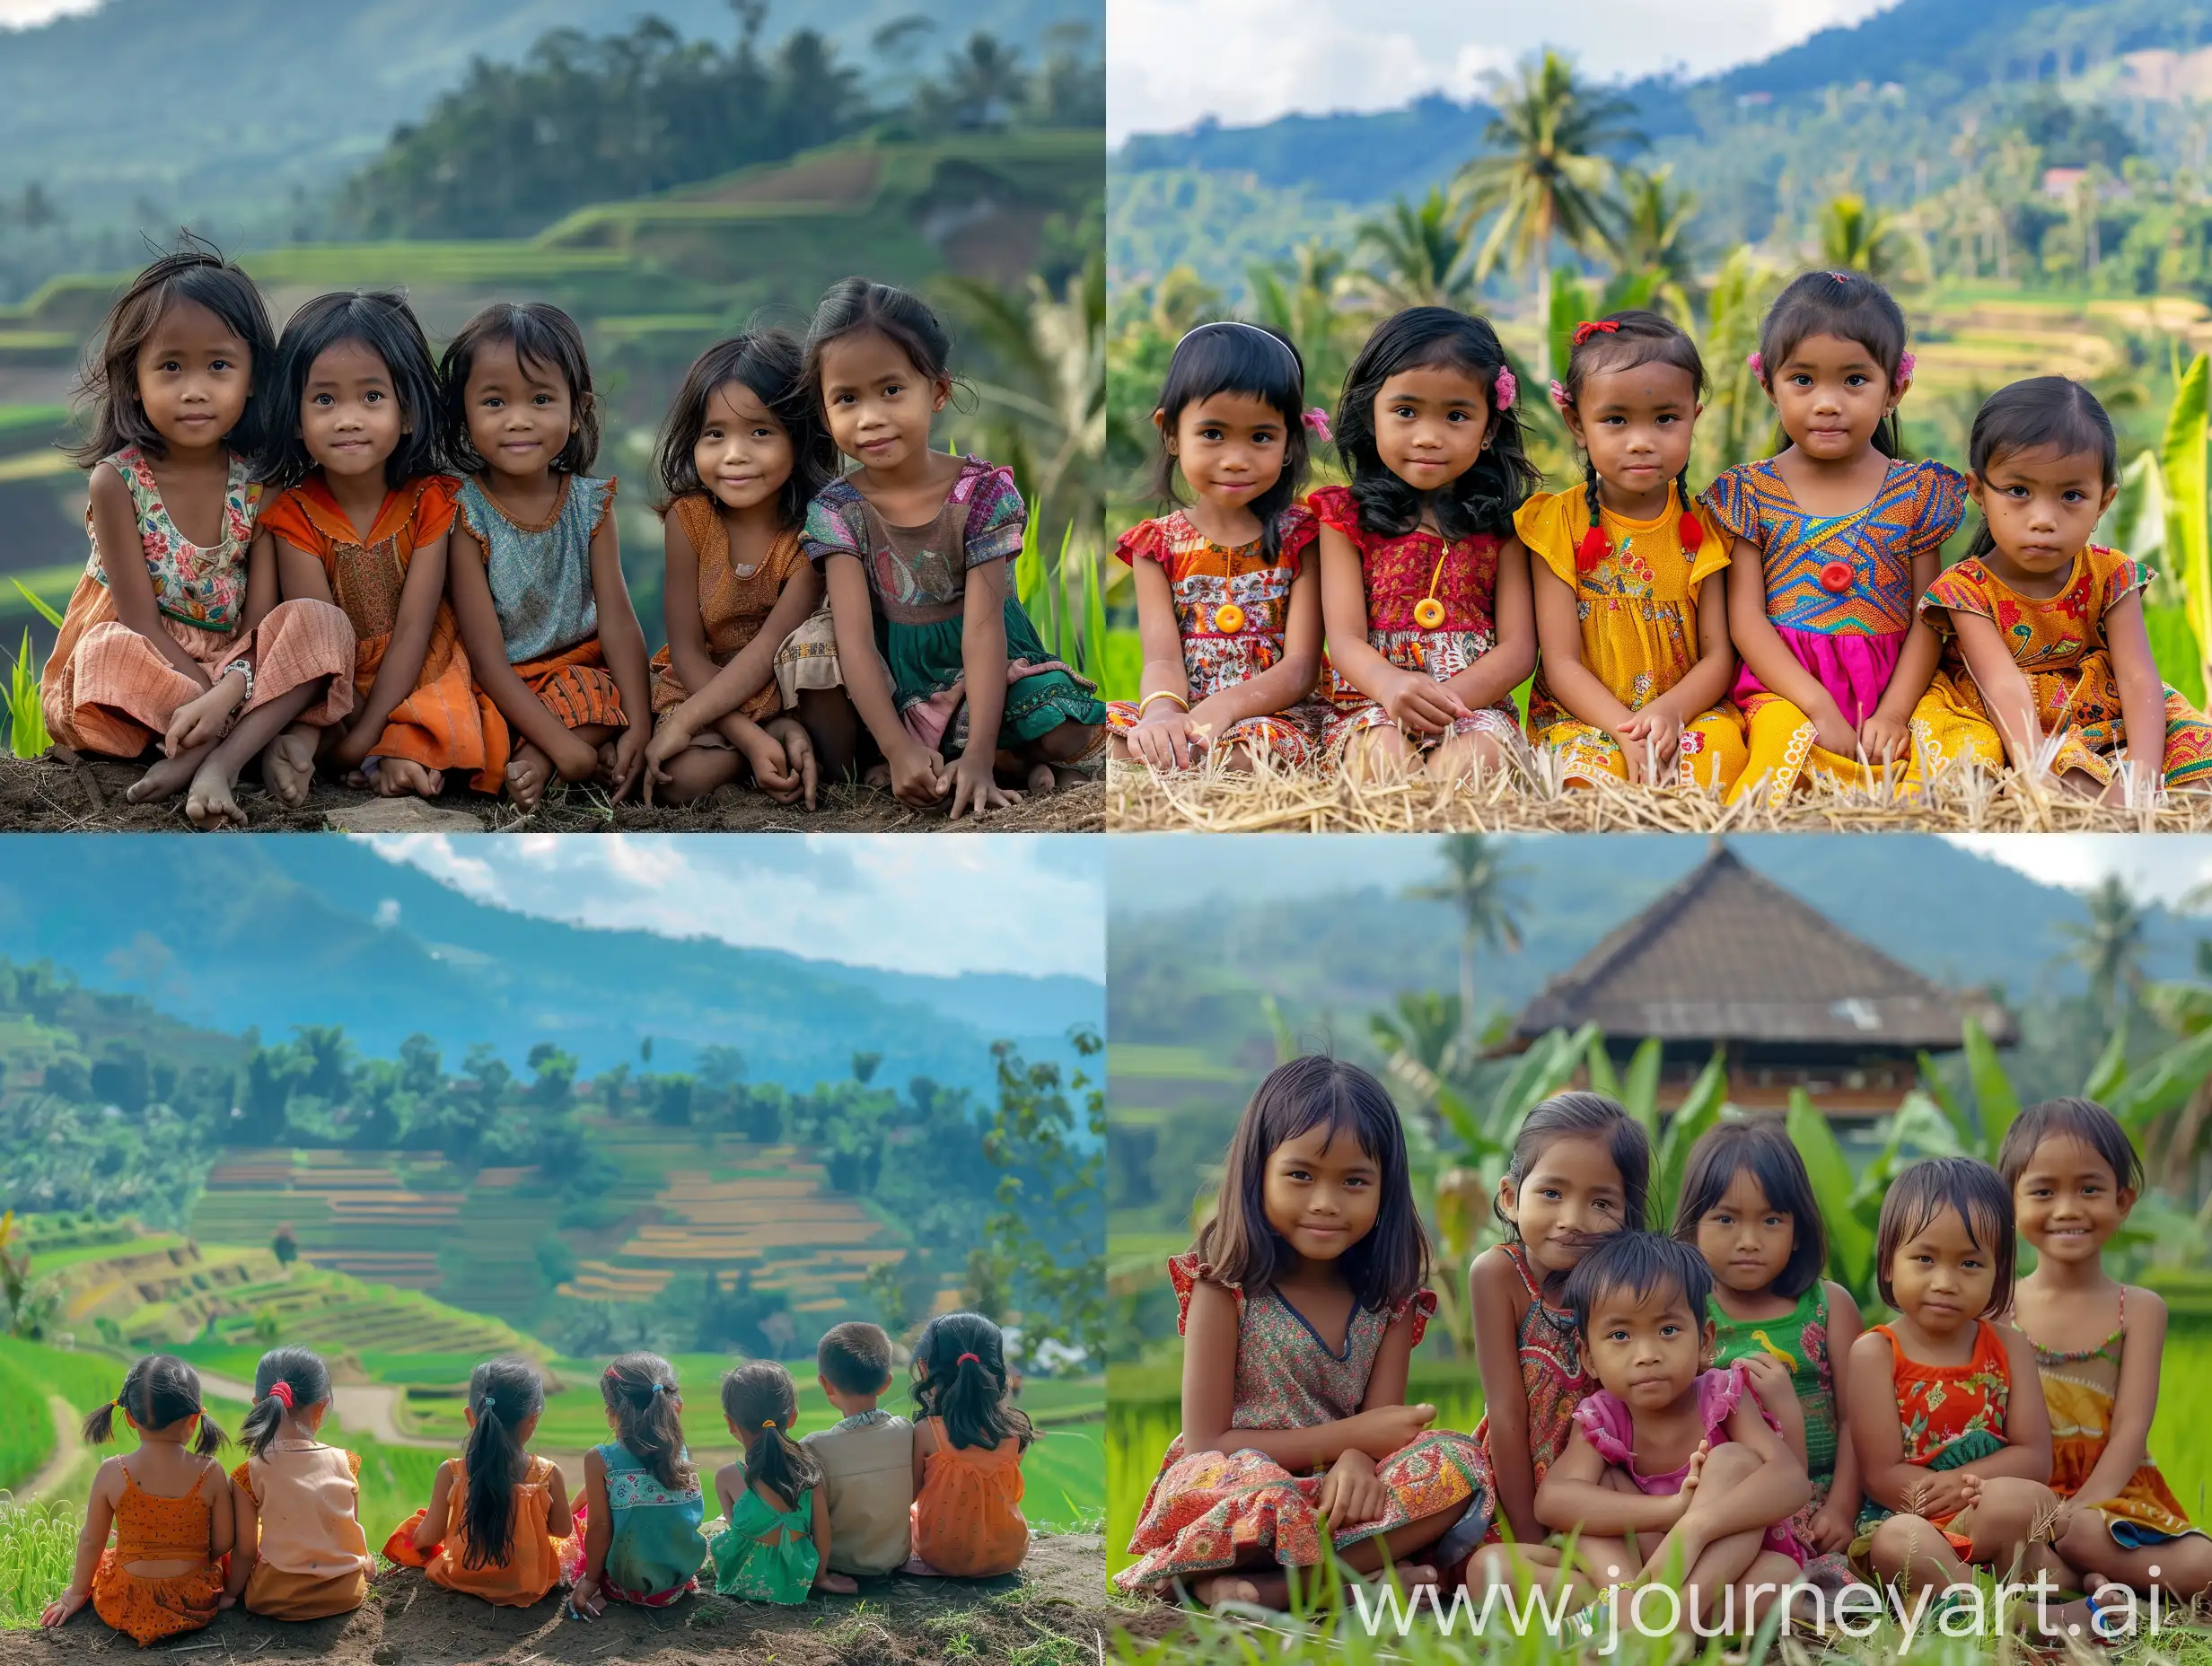 Six-Cute-Indonesian-Girls-Sitting-on-Hill-Overlooking-Rice-Fields-and-Mountains